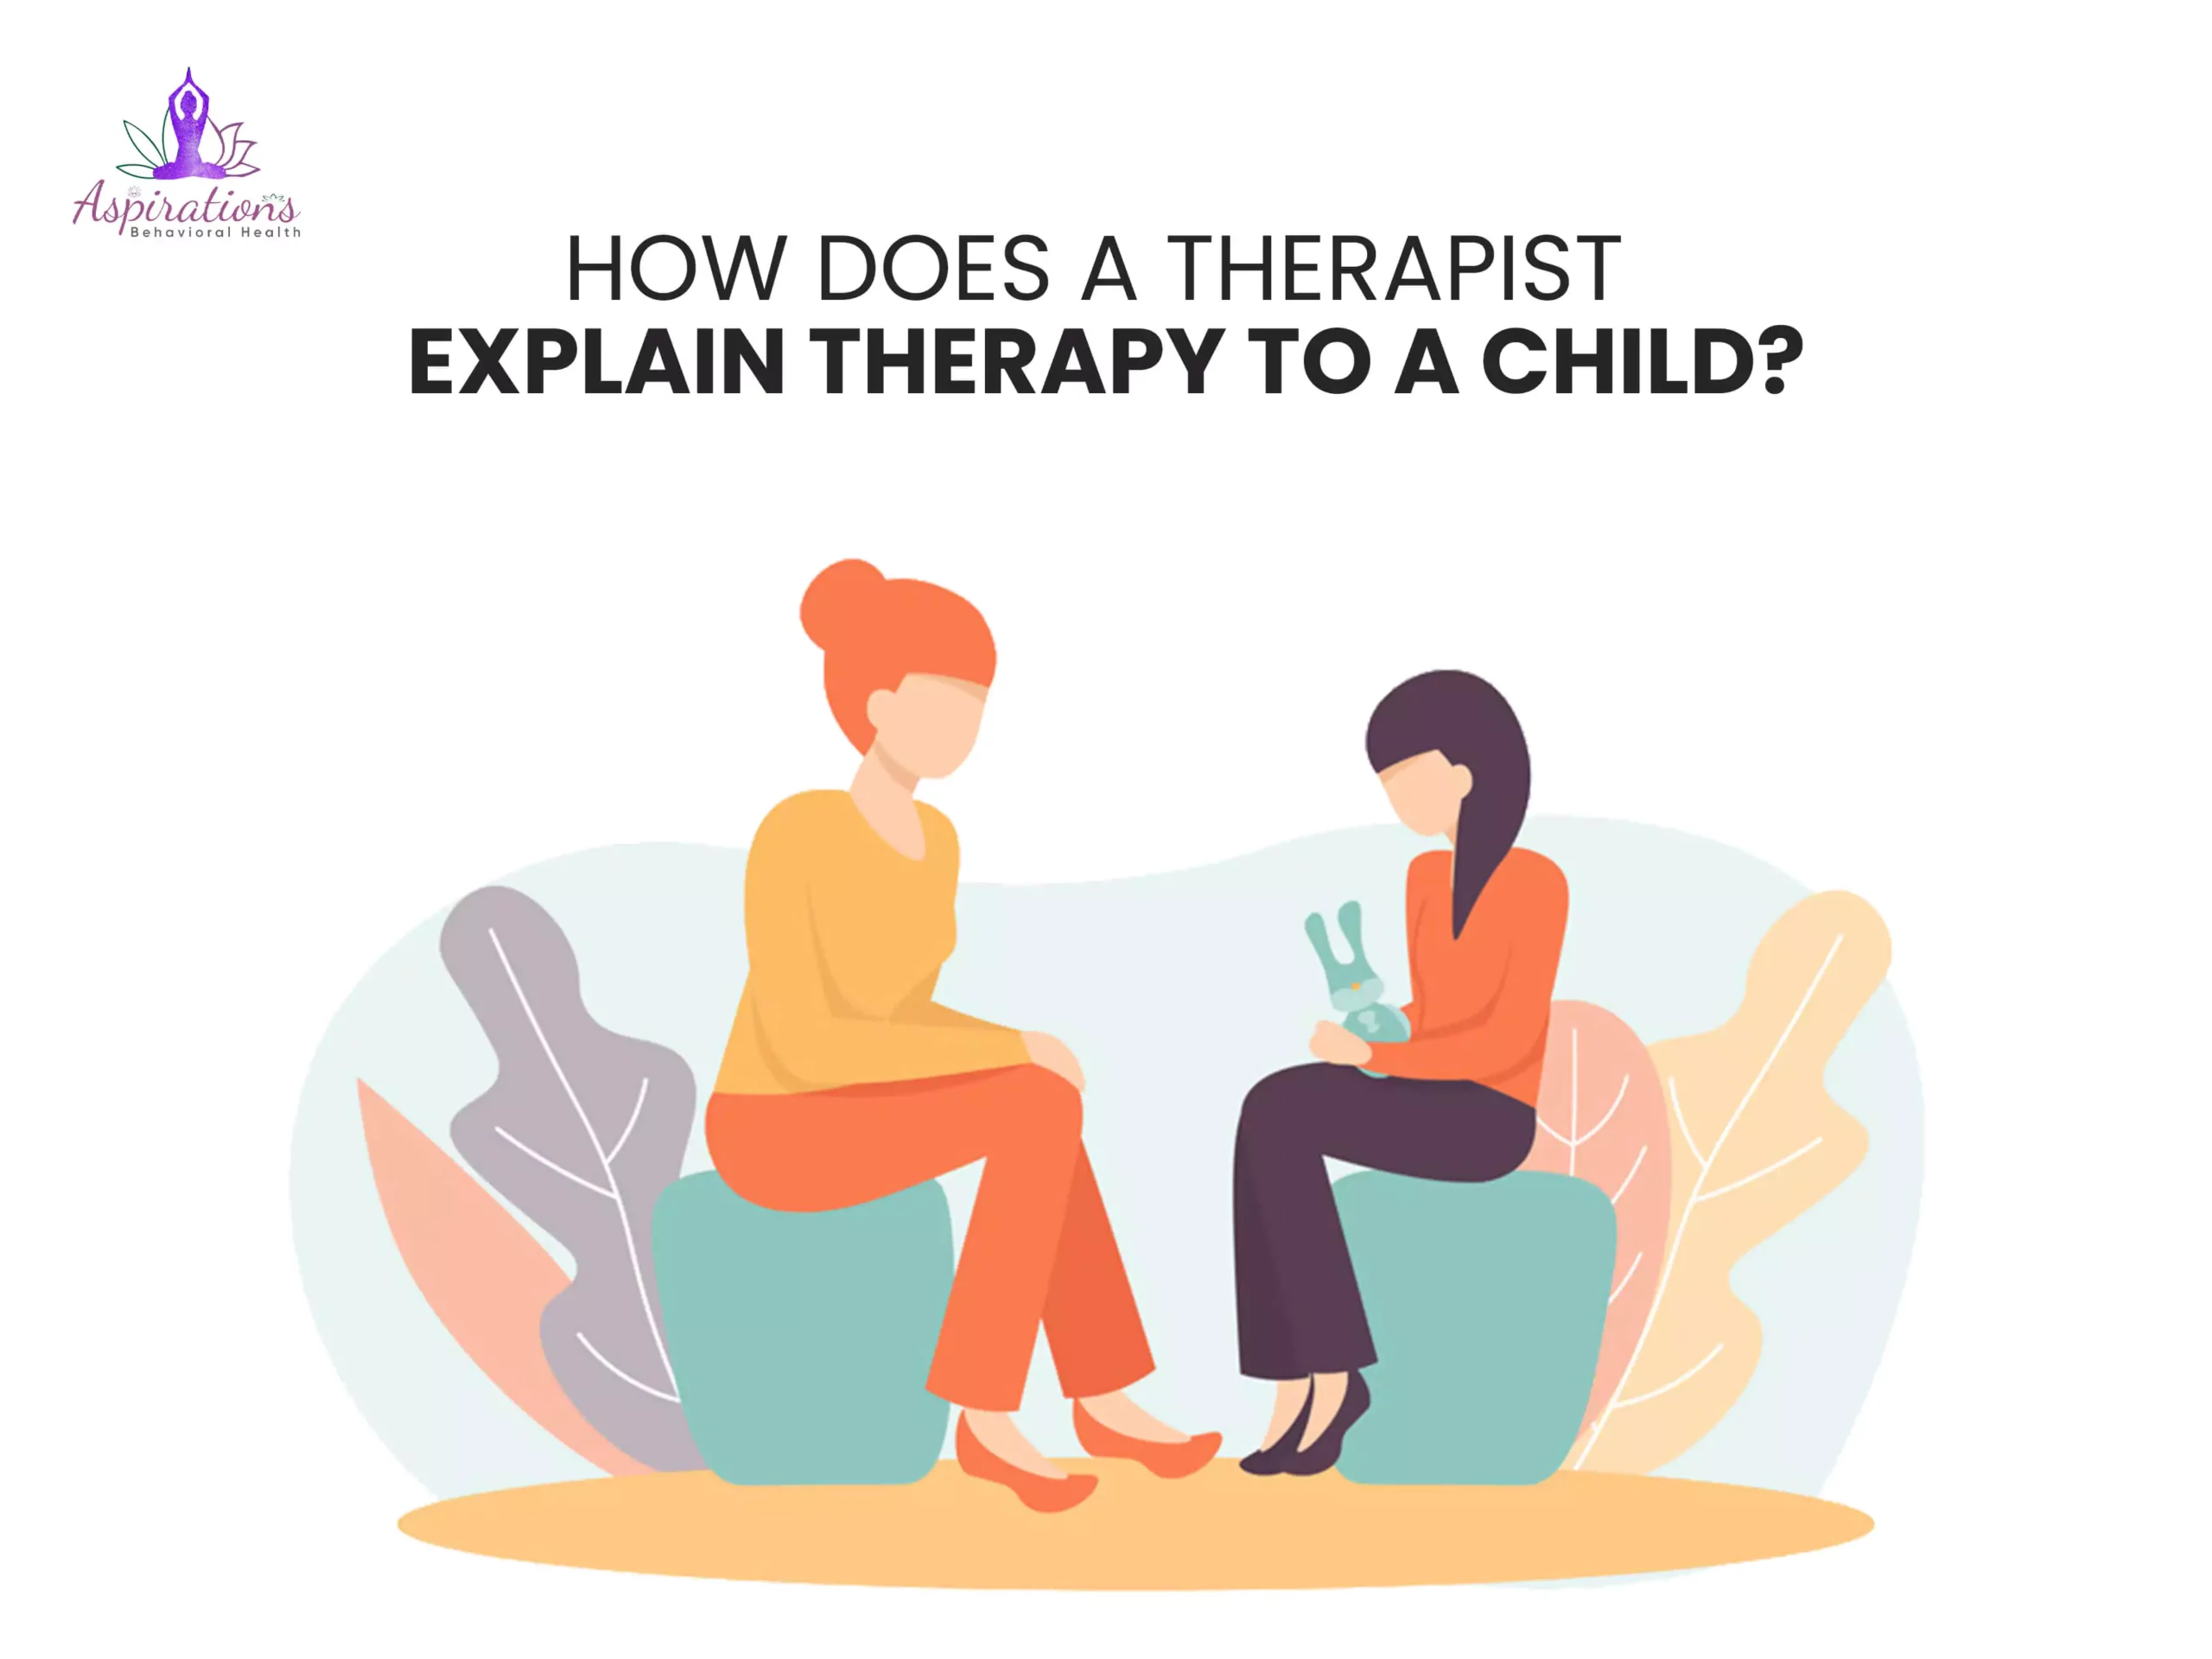 How Does A Therapist Explain Therapy To A Child?